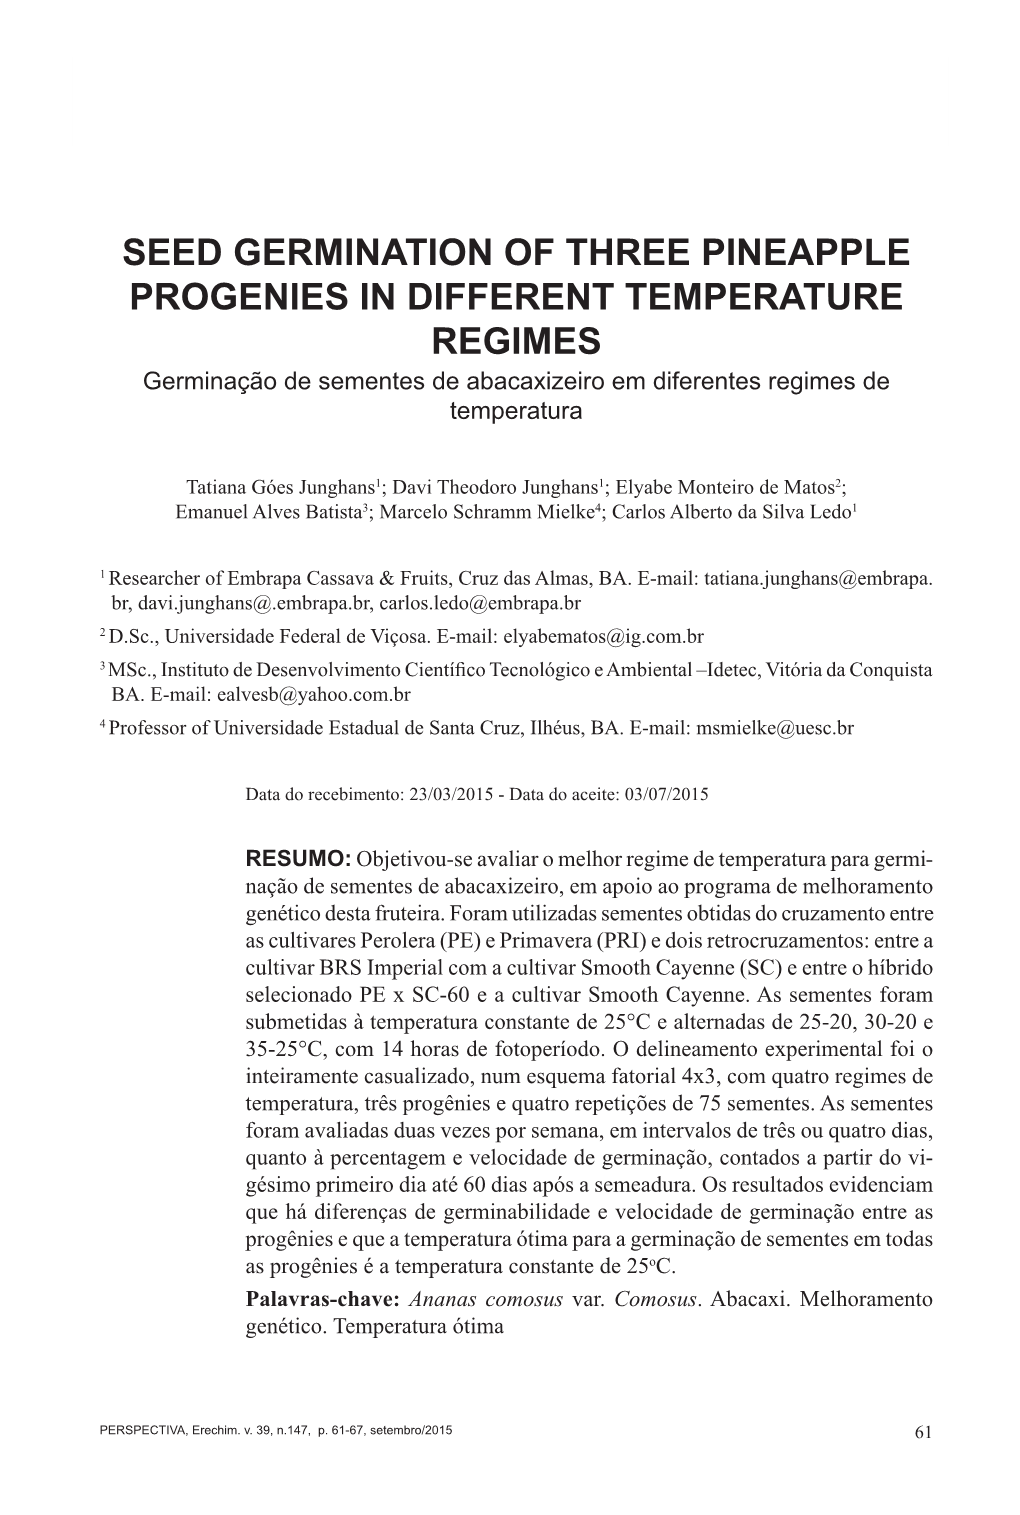 Seed Germination of Three Pineapple Progenies in Different Temperature Regimes